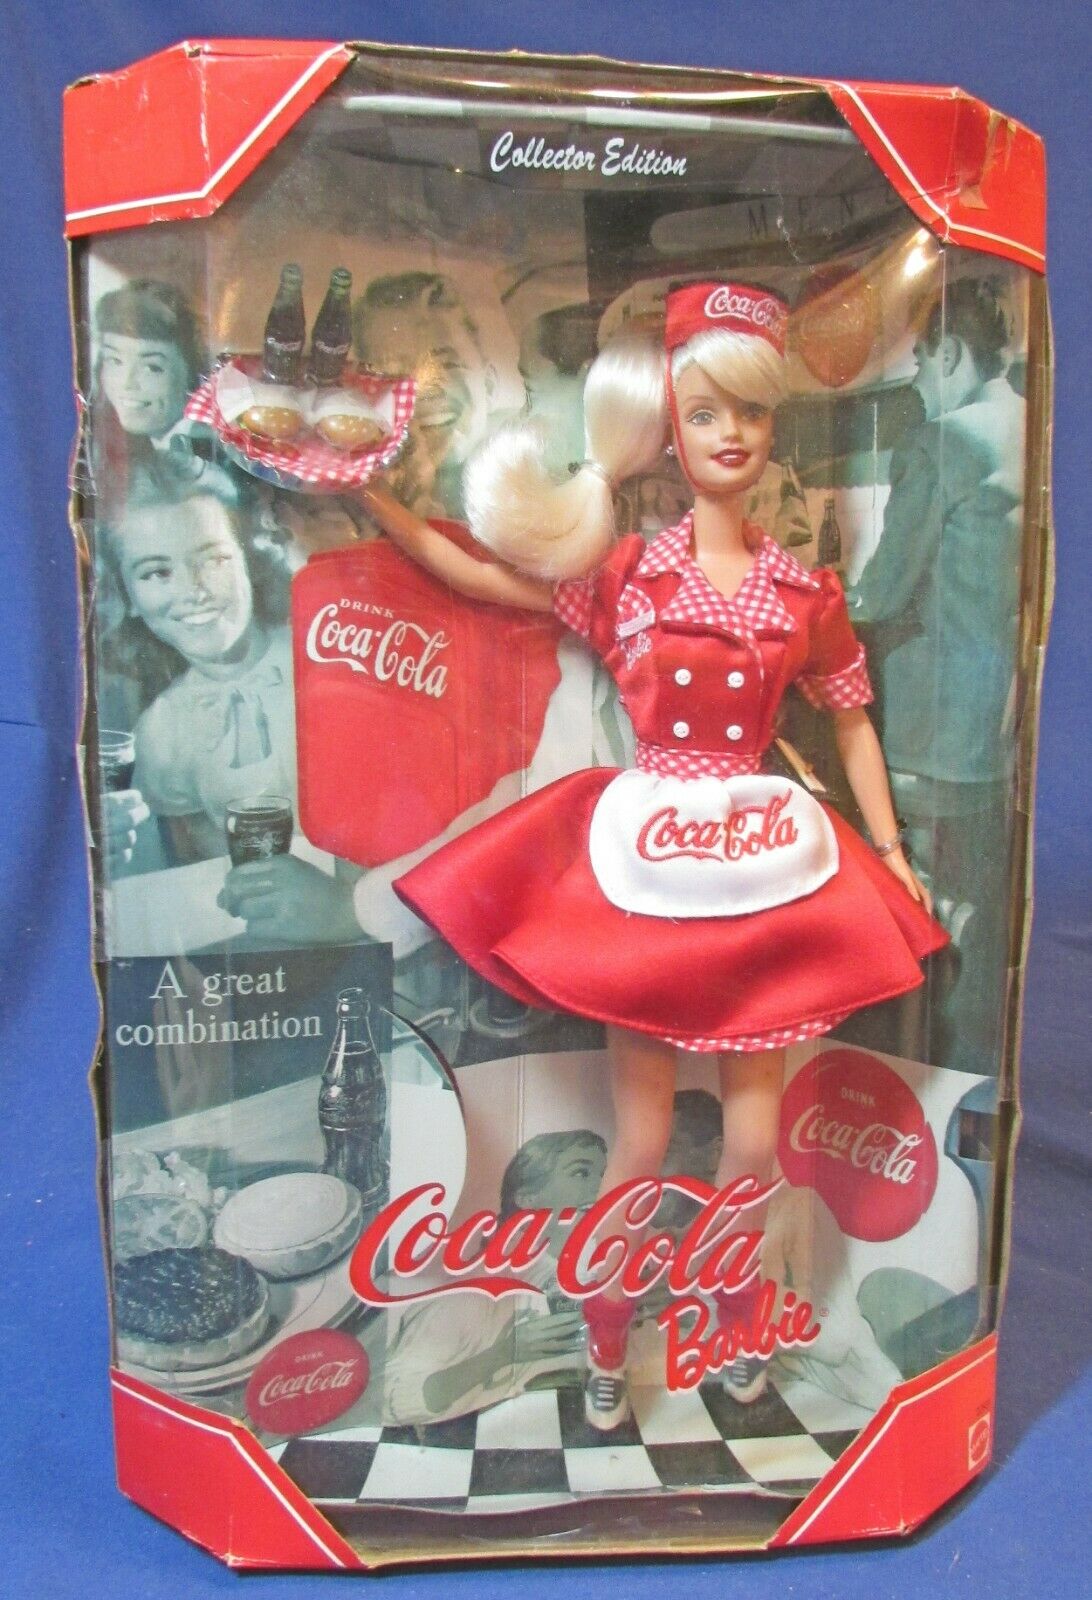 1999 Coca-cola Barbie Car Hop Doll – 1st In Series, Nrfb – Collector Edition